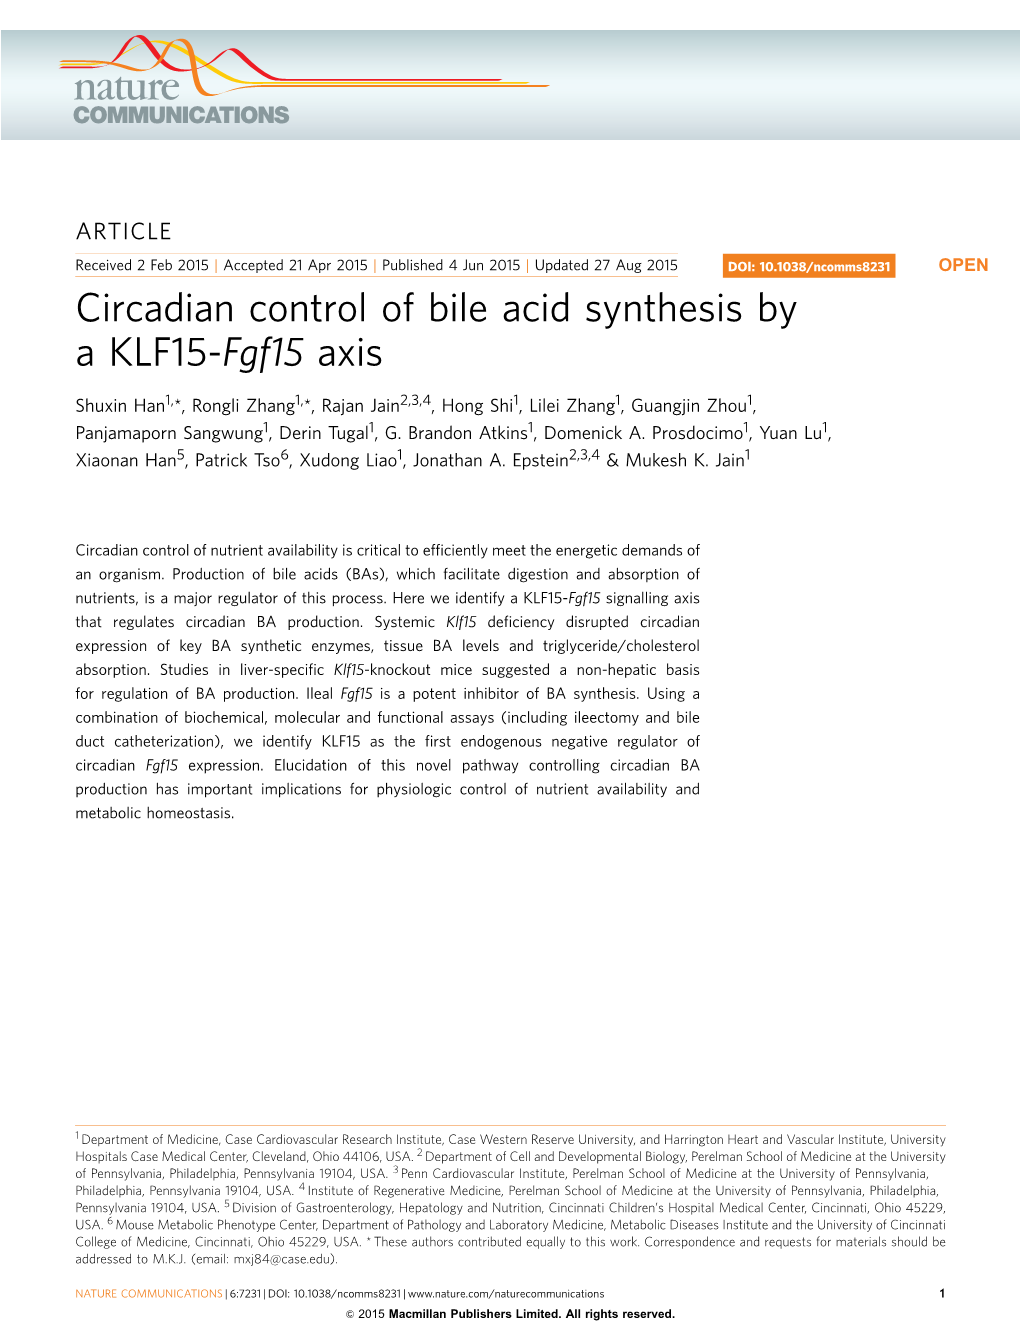 Circadian Control of Bile Acid Synthesis by a KLF15-Fgf15 Axis